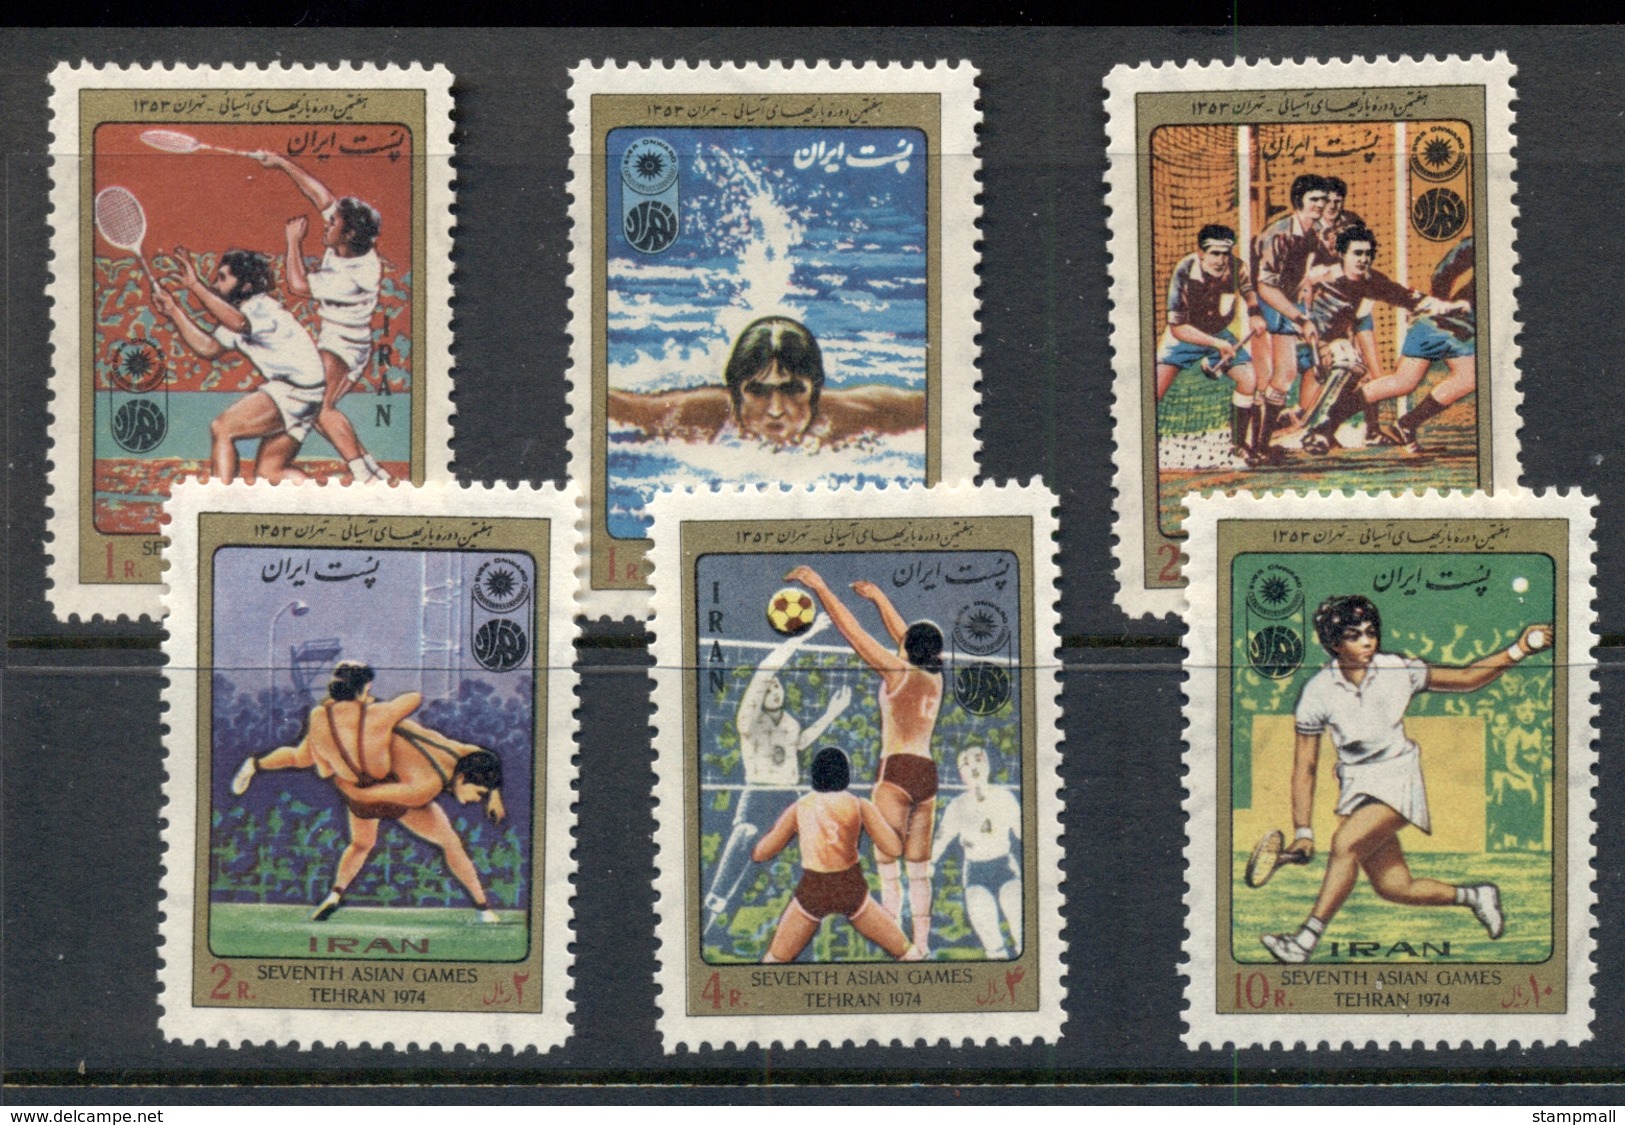 Middle East 1974 Asian Games (II) MUH - Iran